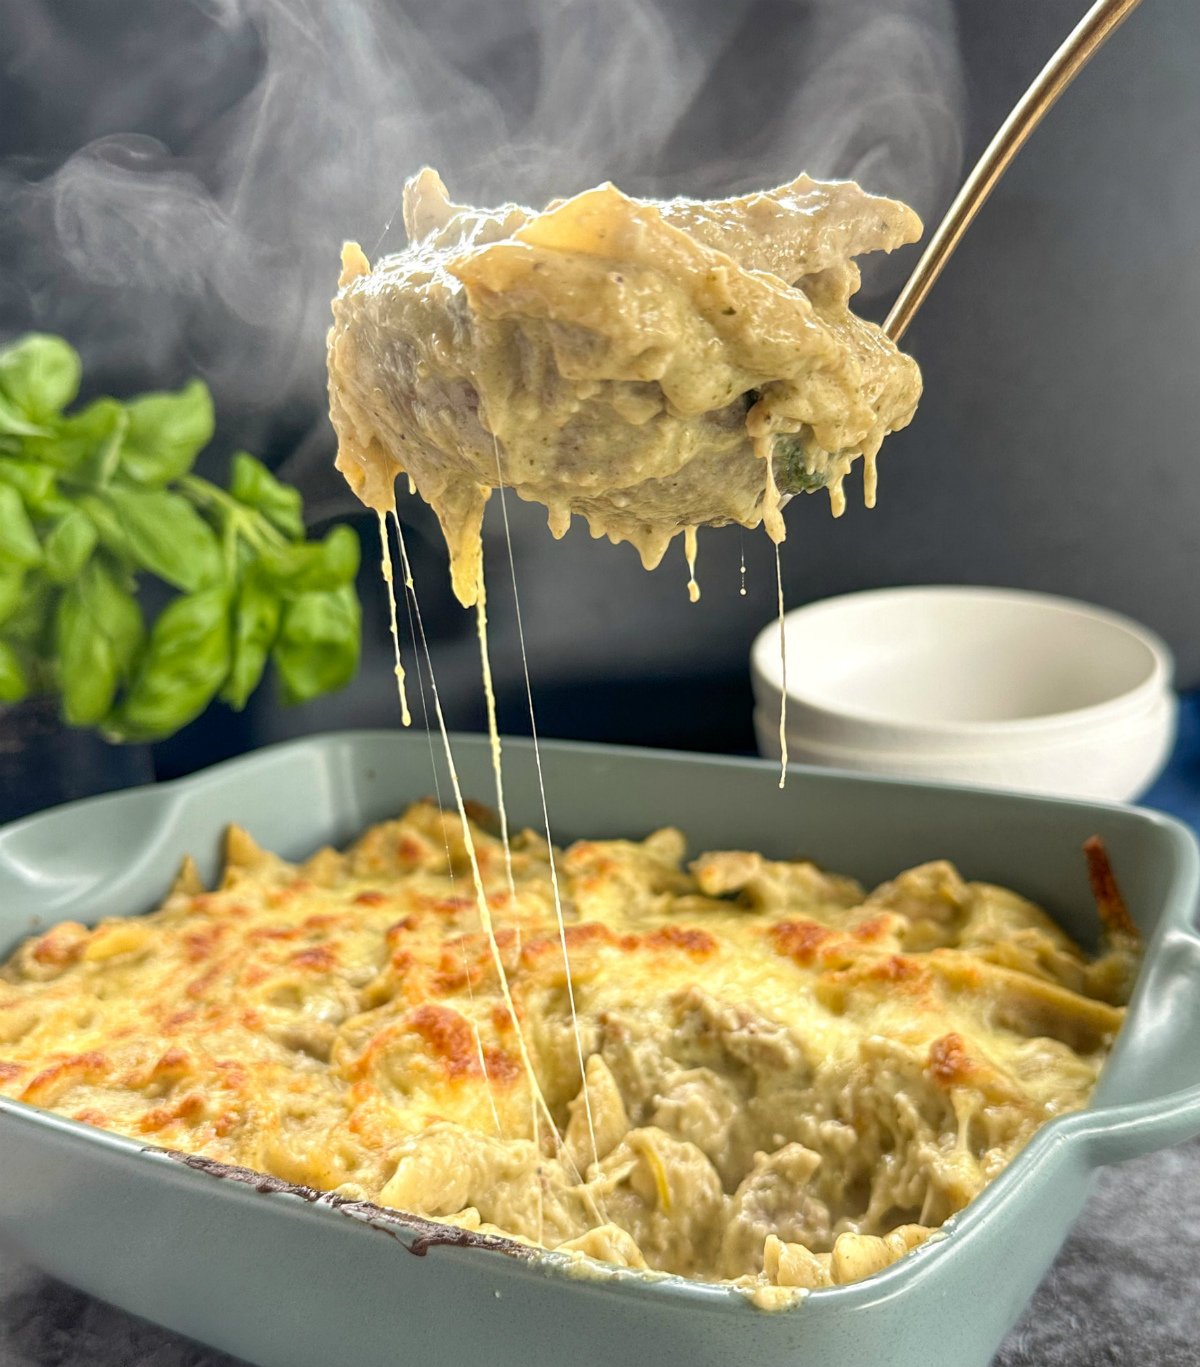 Slow Cooker Creamy Chicken Pesto Pasta Bake in a green baking dish, with mozzarella strings and steam coming off the ladle of pasta